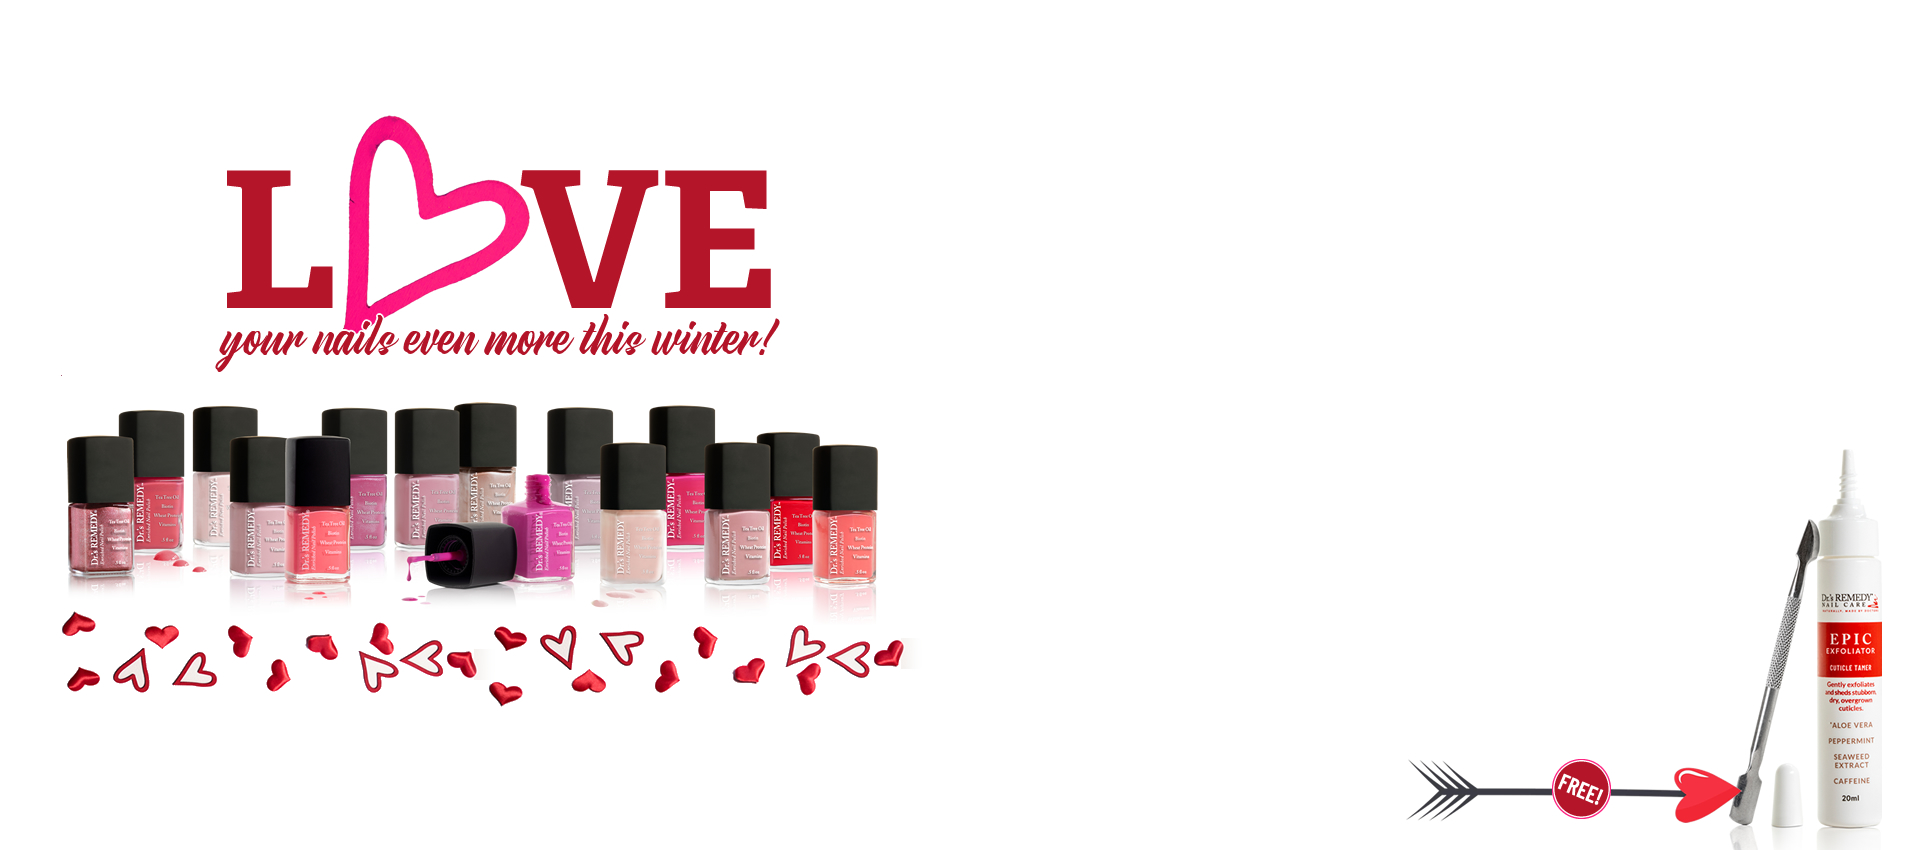 SNAG ANY PINK  ONLY 10  Andnbsp   Choose 4 Pinks  Get EPIC Exfoliator    FREE    Celebrate This Valentineandrsquo S Day With Some Quality Self Love  Use Code  MYVALENTINE2024 EXPIRES 2292024  RETAIL PURCHASE ONLY ONE CODE PER CUSTOMER  Shop Now